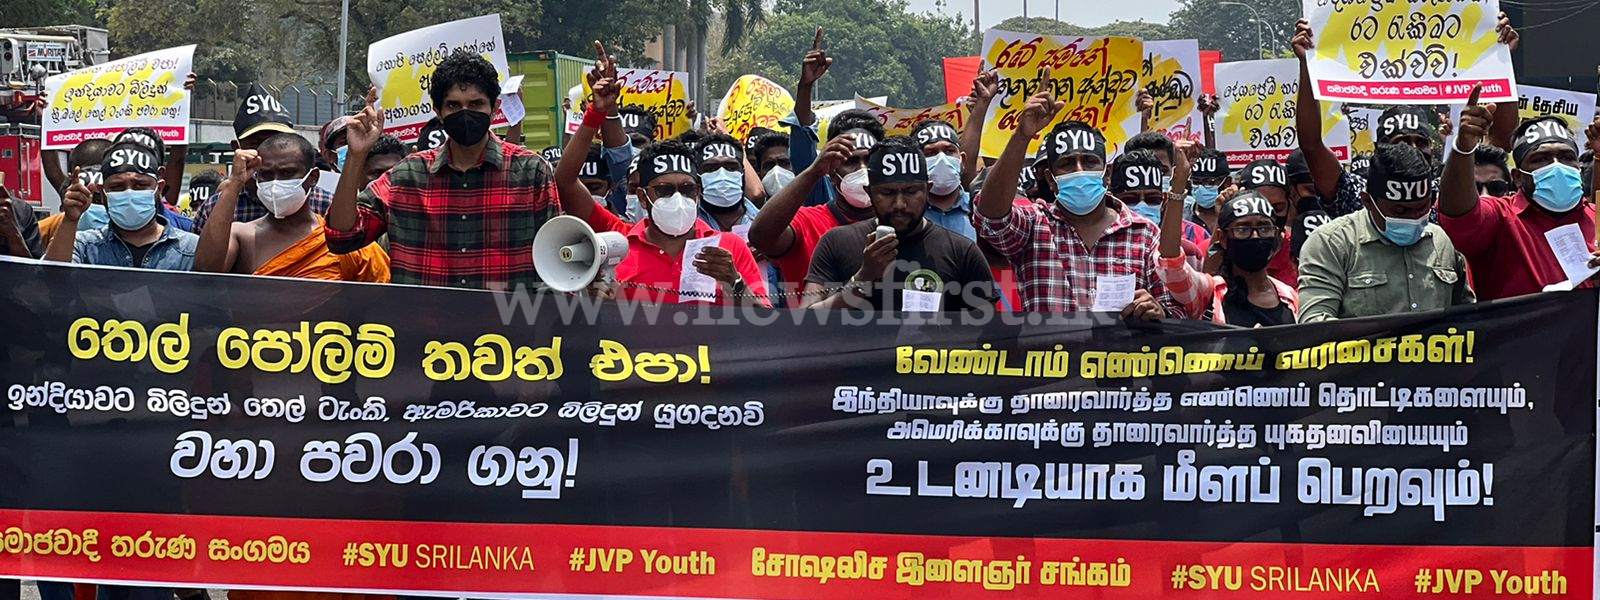 Massive Protest in Colombo; Socialist Youth protest against govt decisions